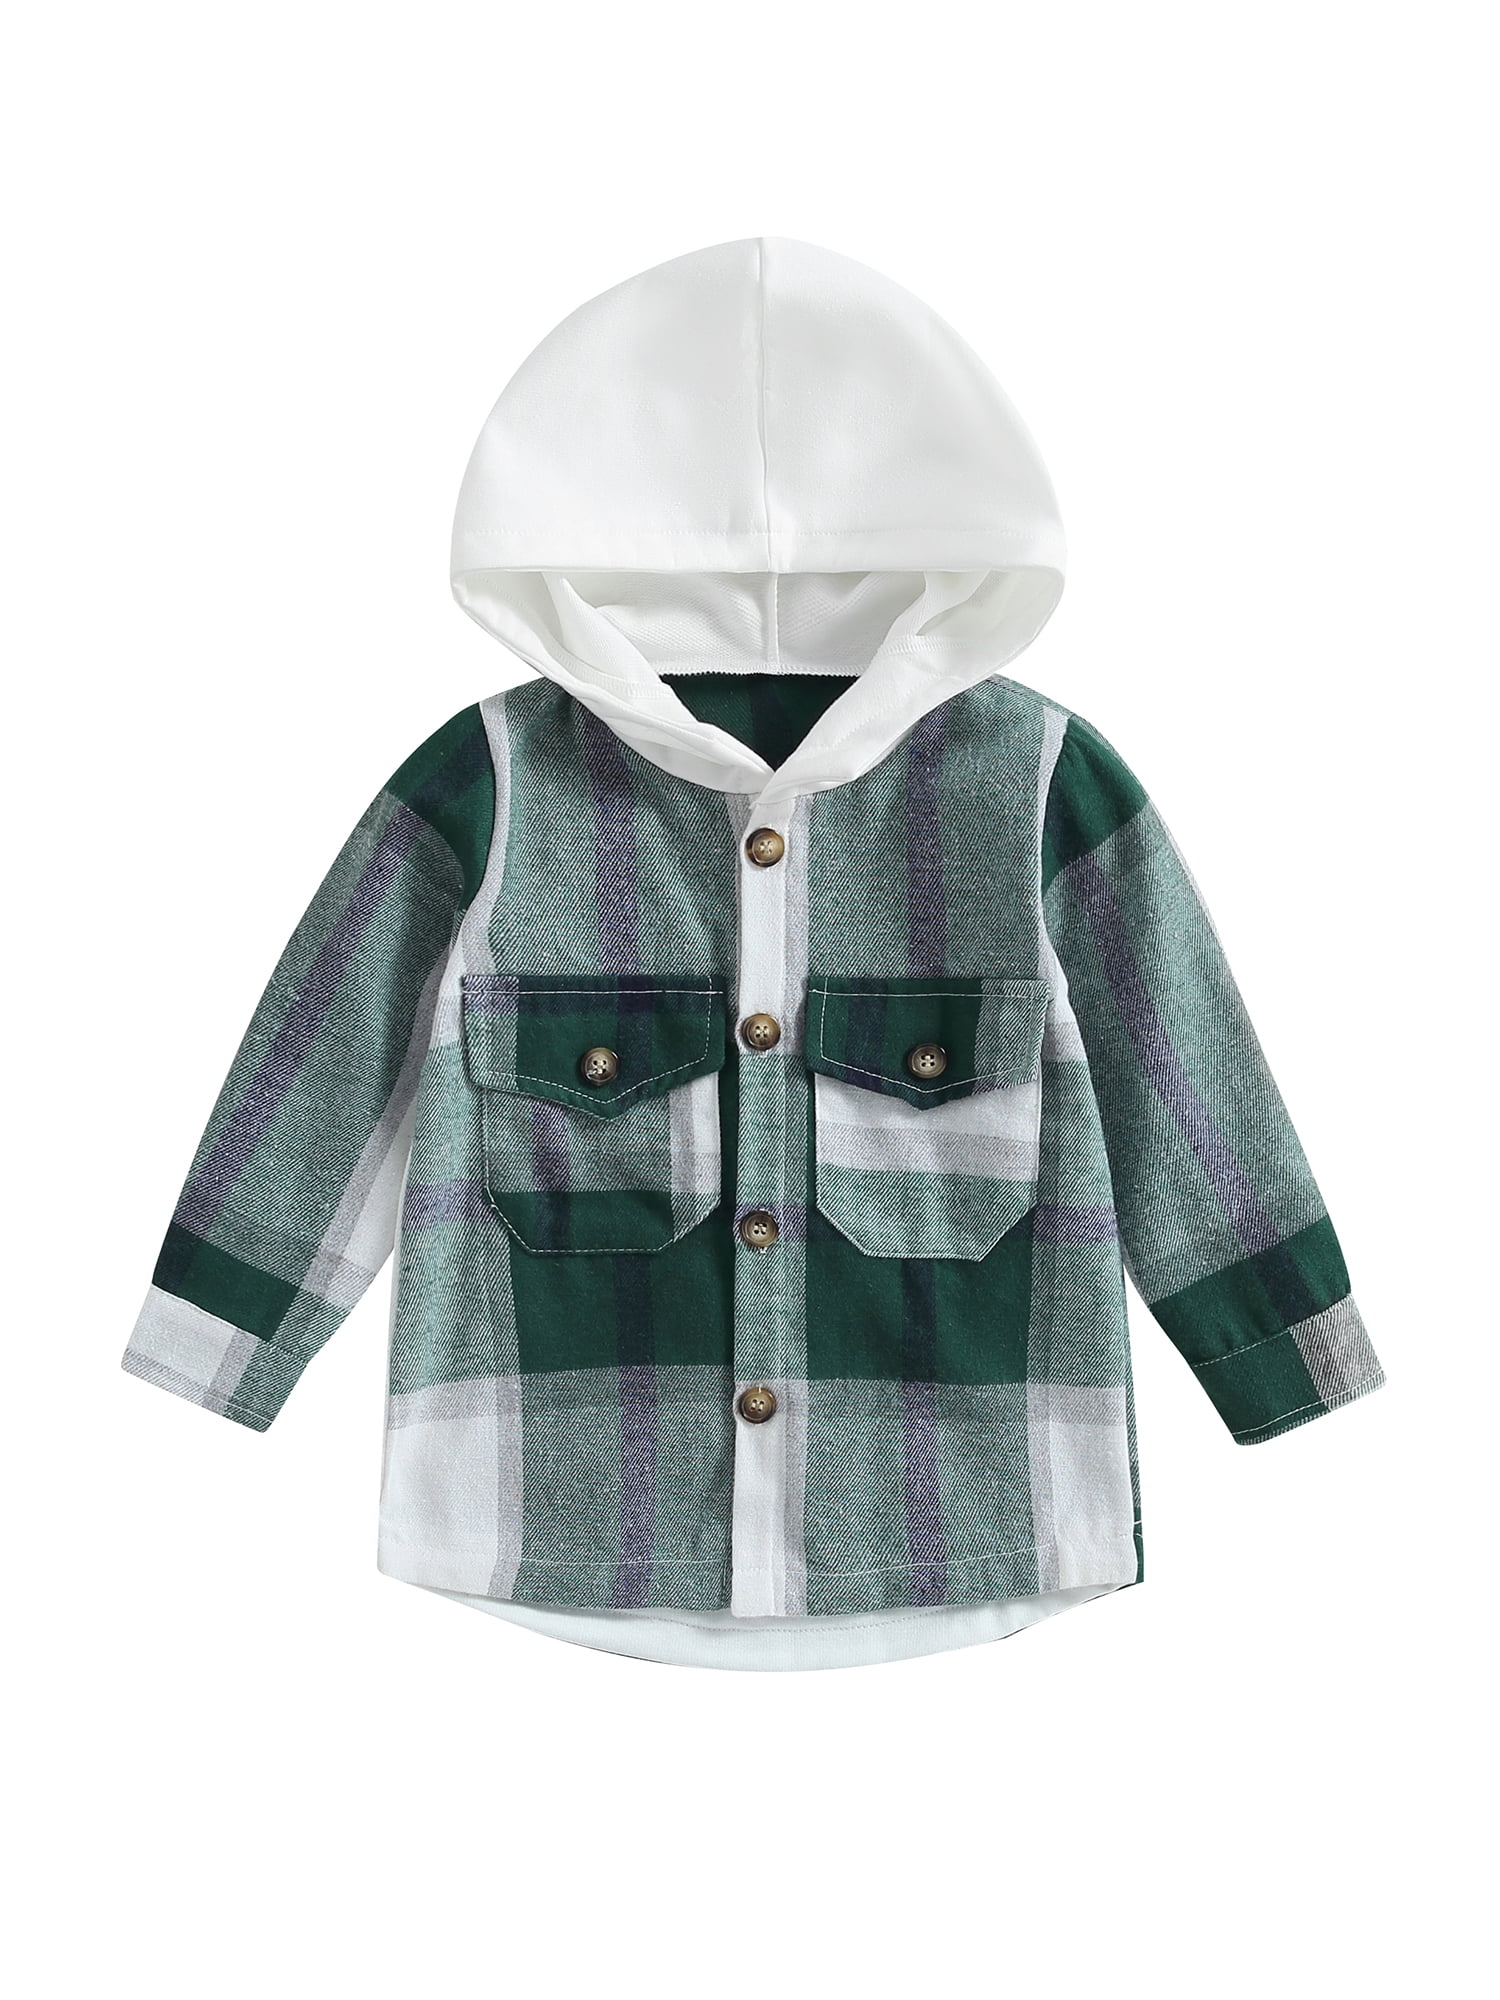 Shuttle tree Toddler Kids Baby Boys Girls Fall Clothes Plaid